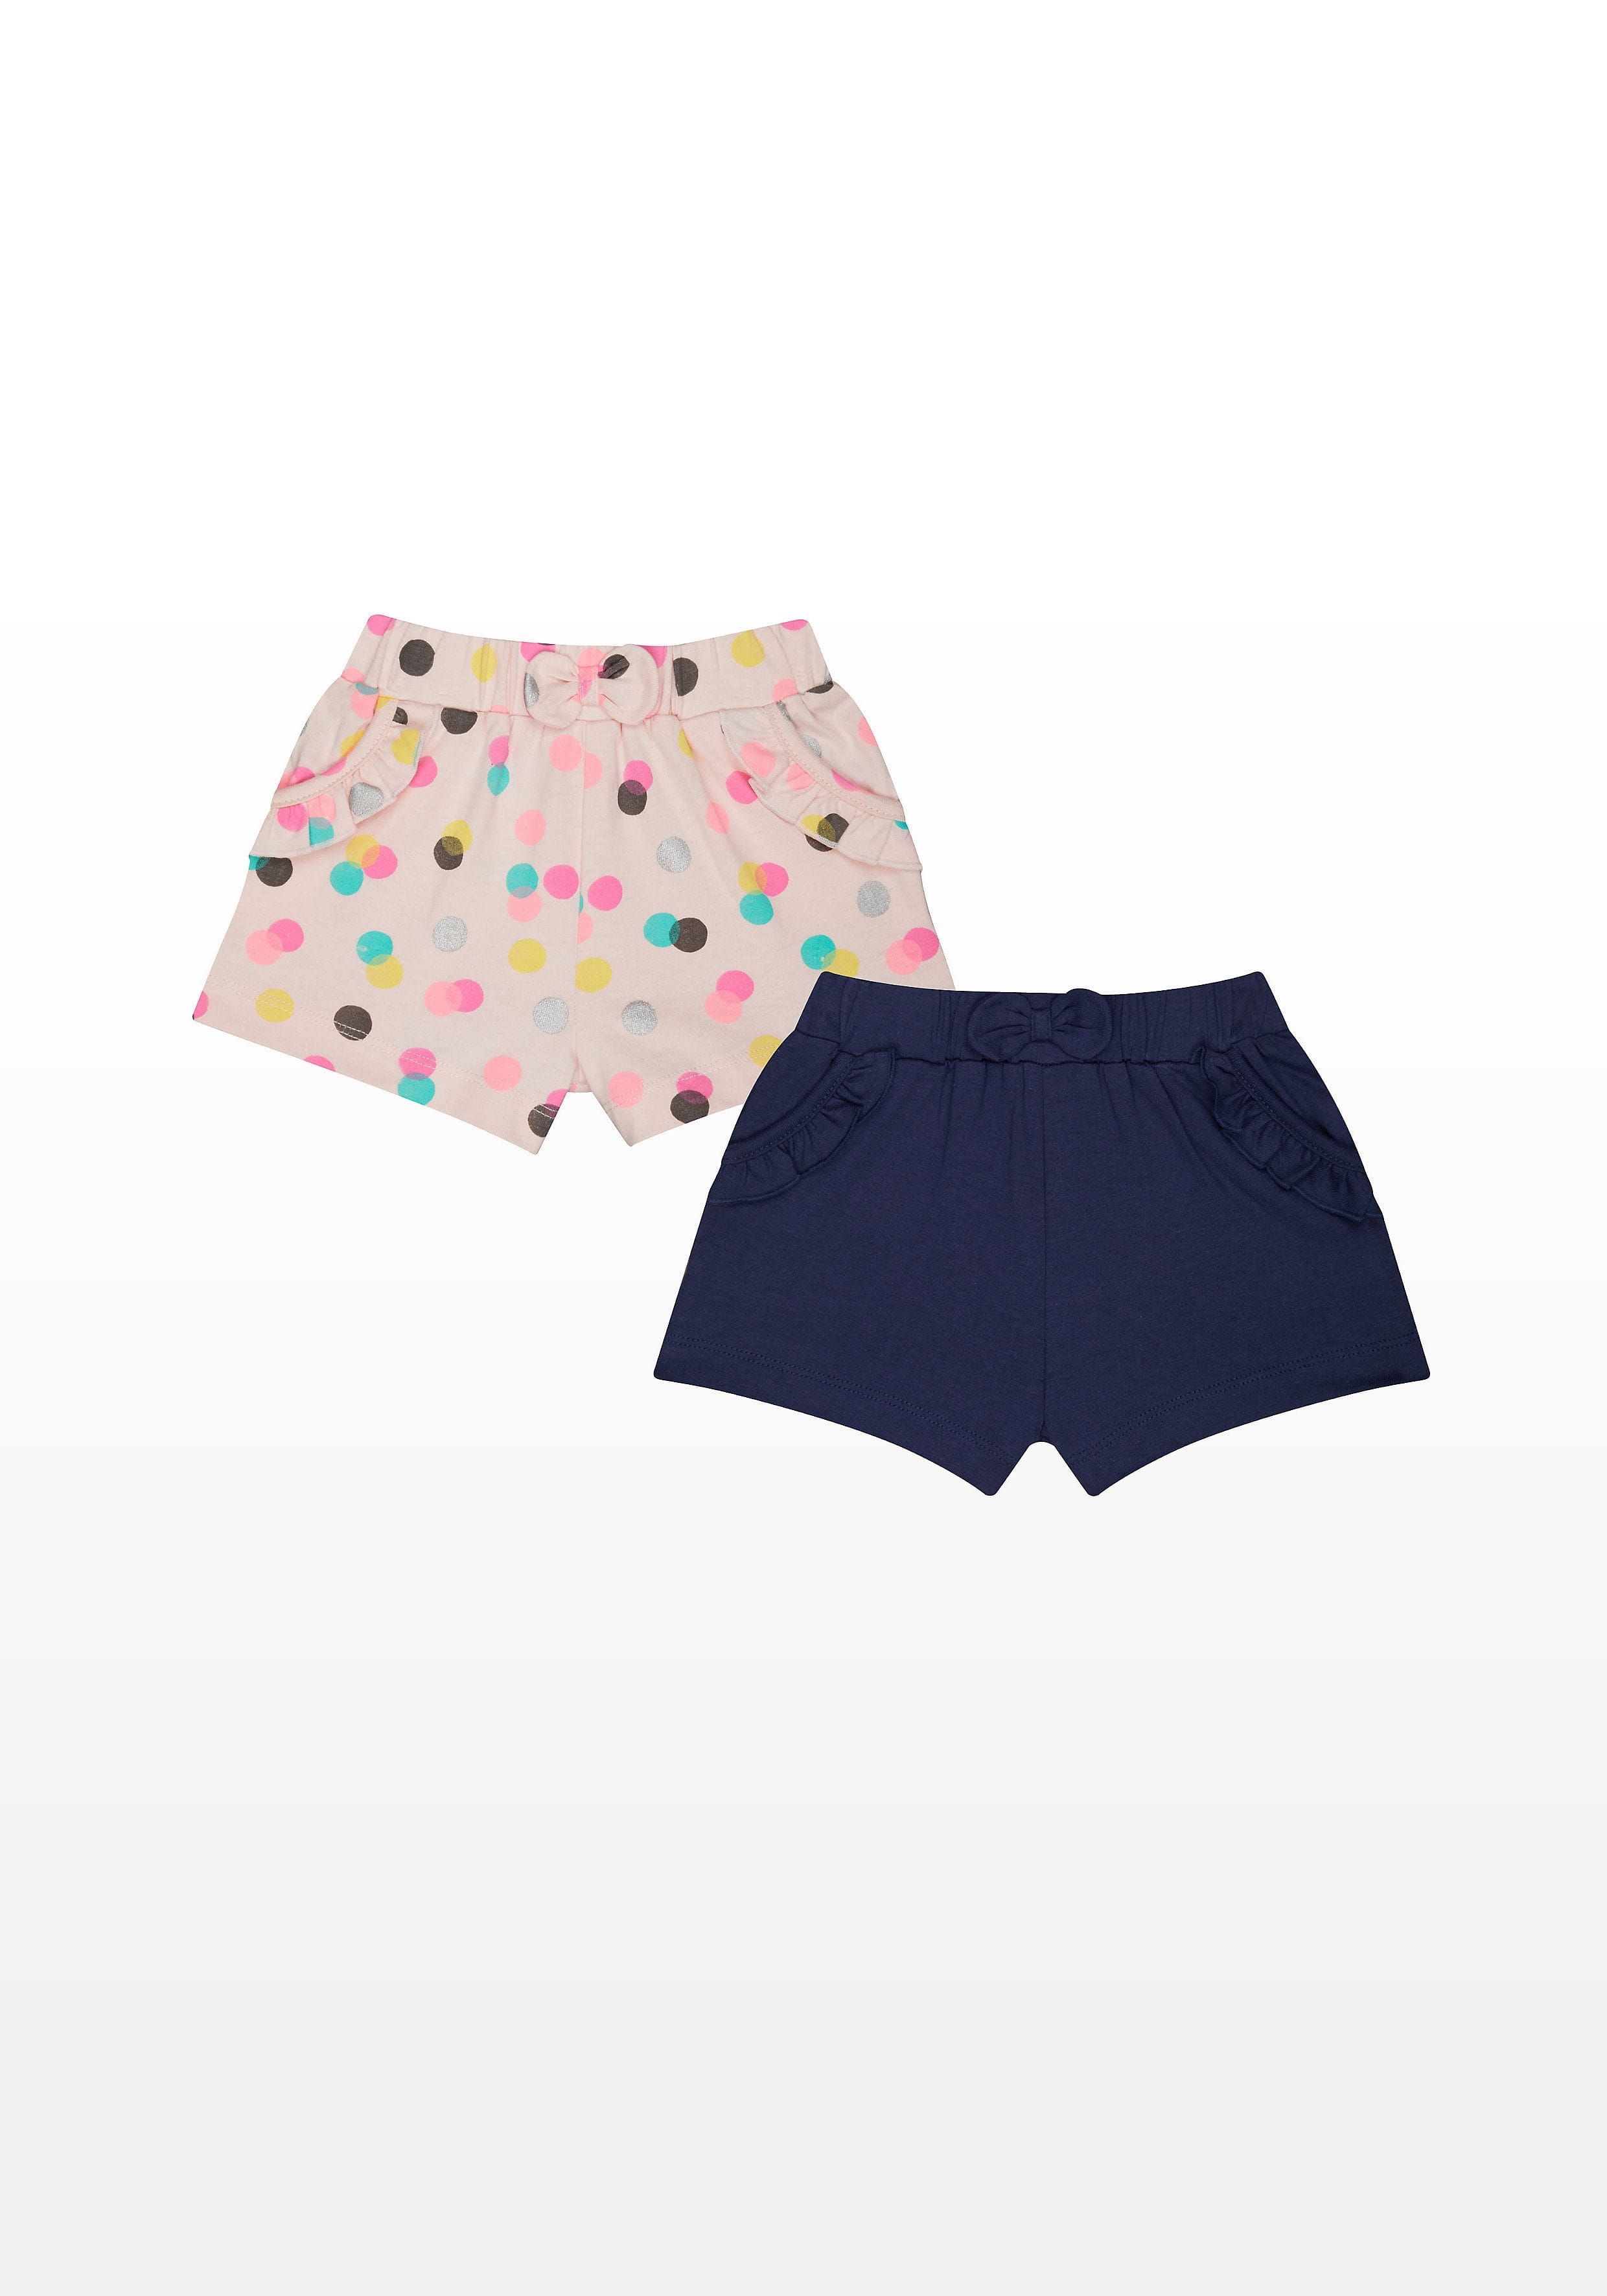 Mothercare | Blue and Pink Shorts - Pack of 2 0